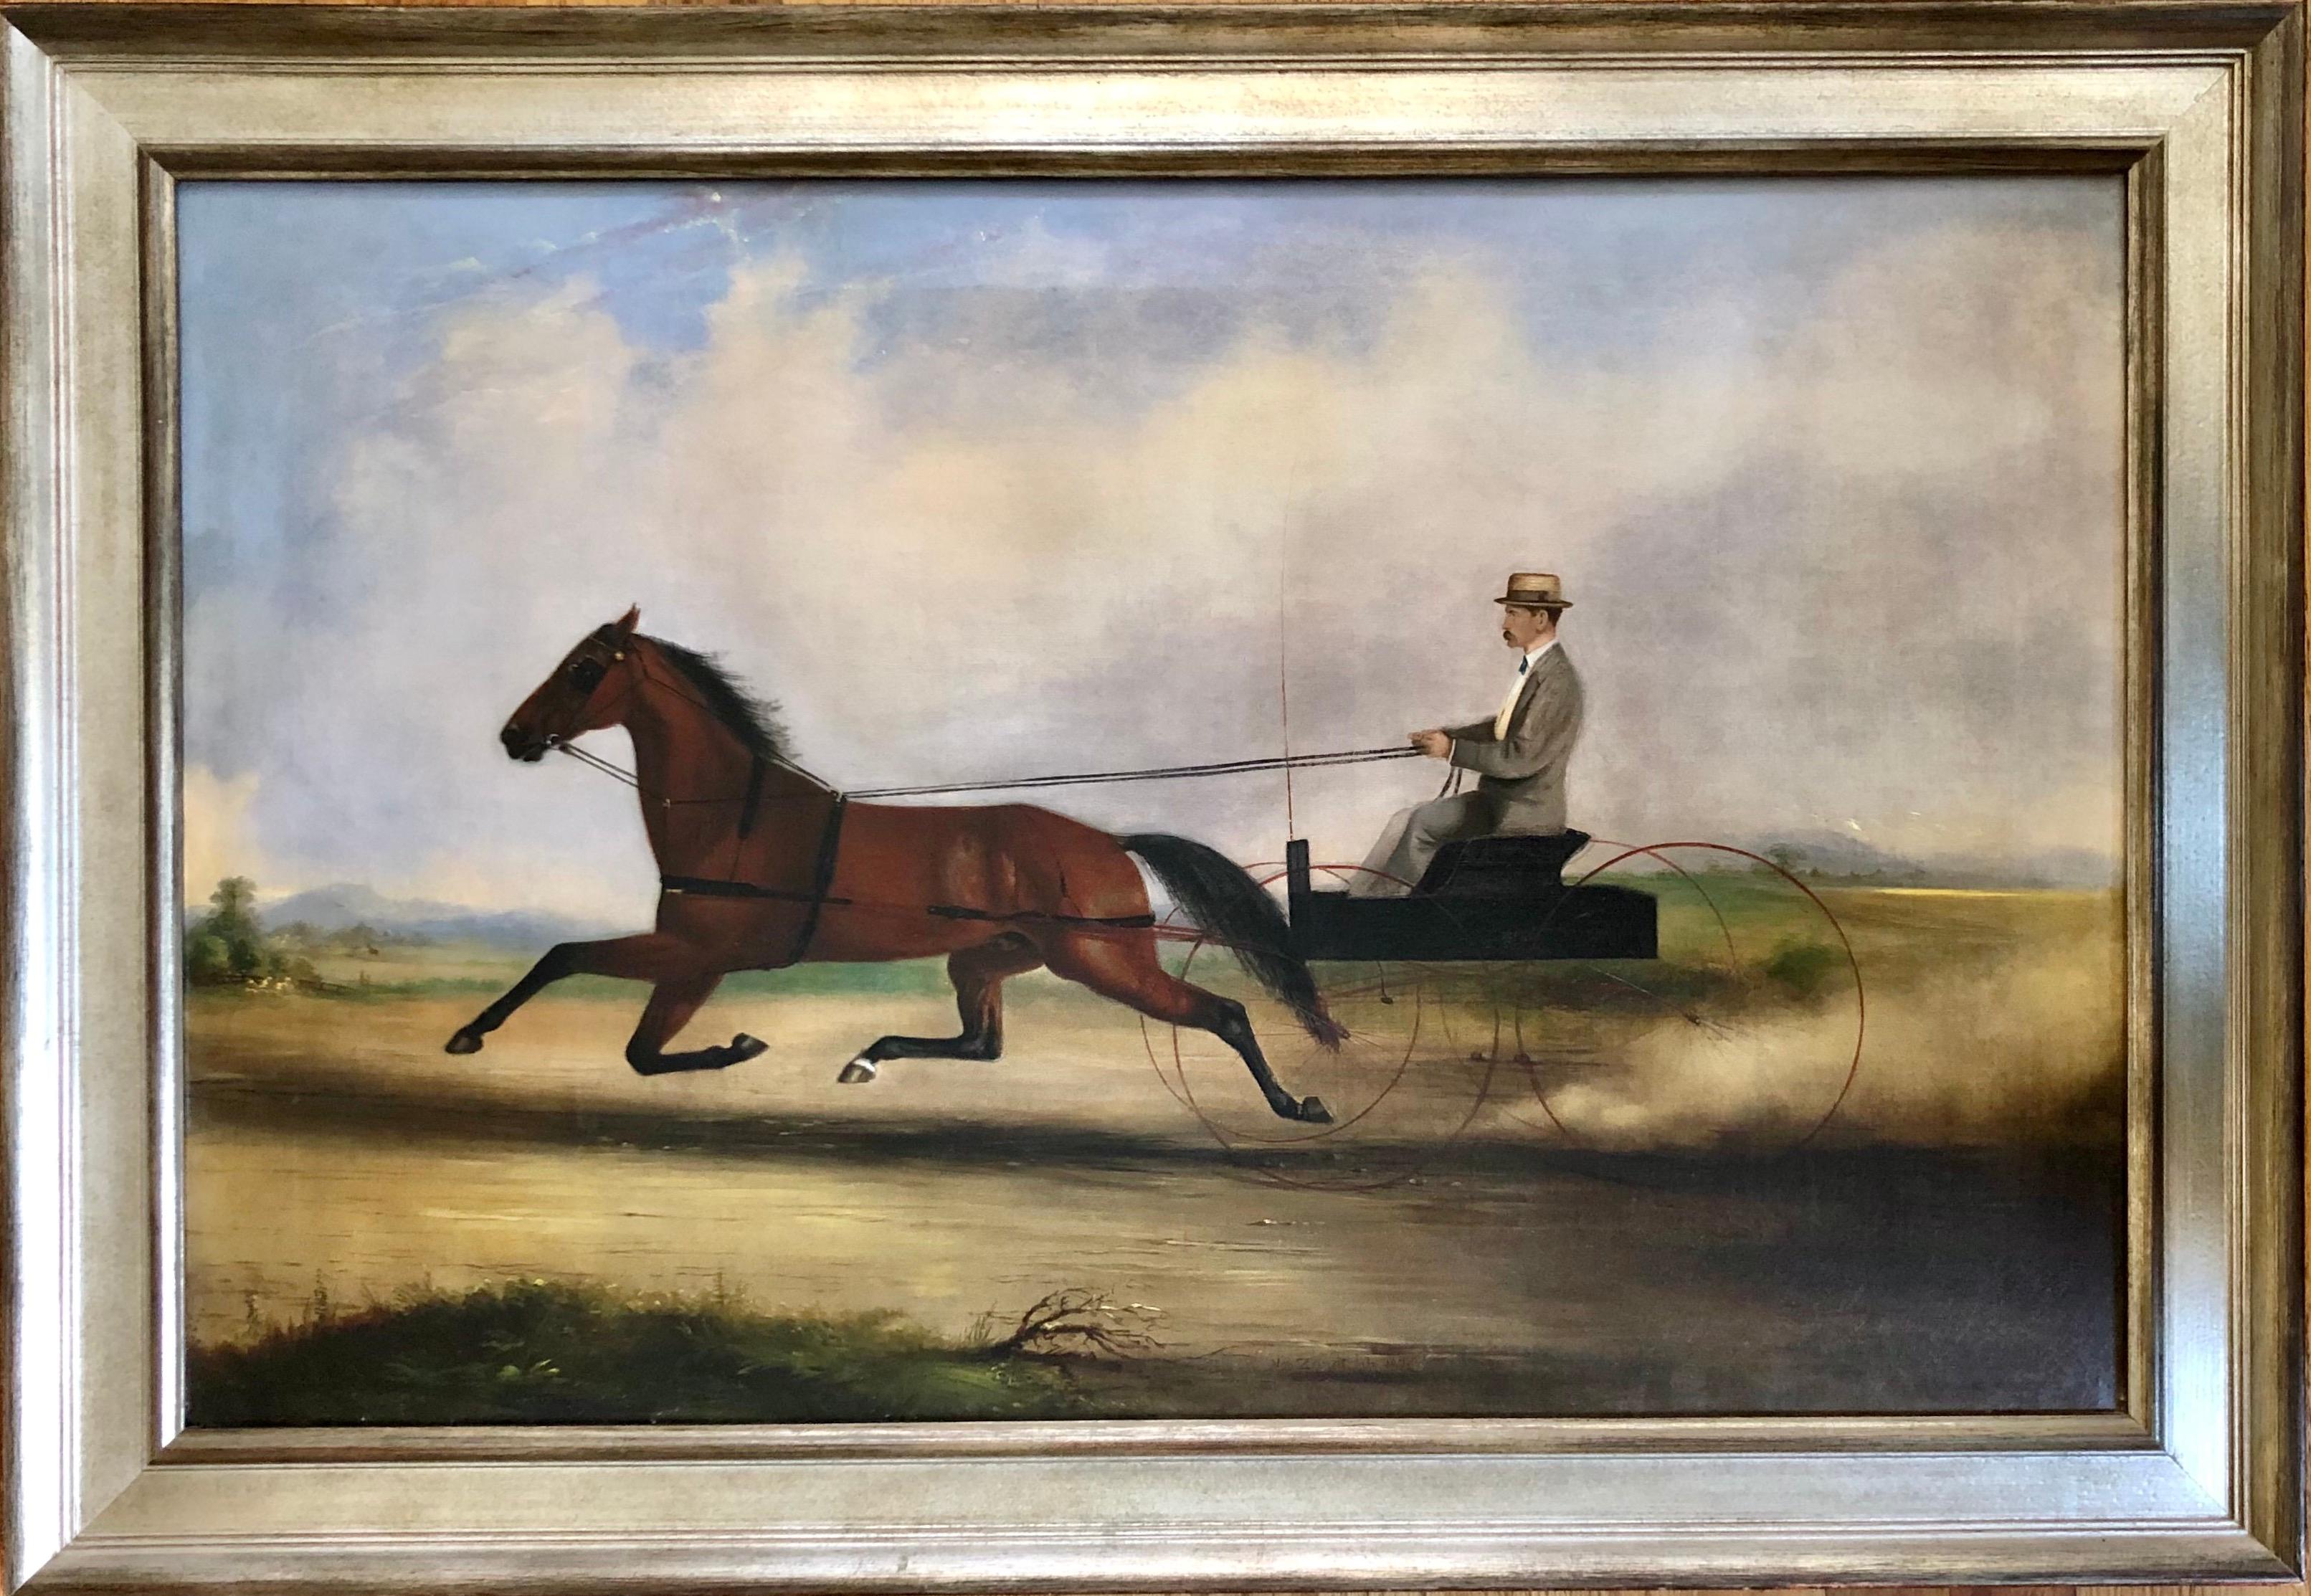 Rare 19th century painting of a man is a buggy trotting quickly. Oil on canvas signed and dated 1872 lower center. 
Measures: 21